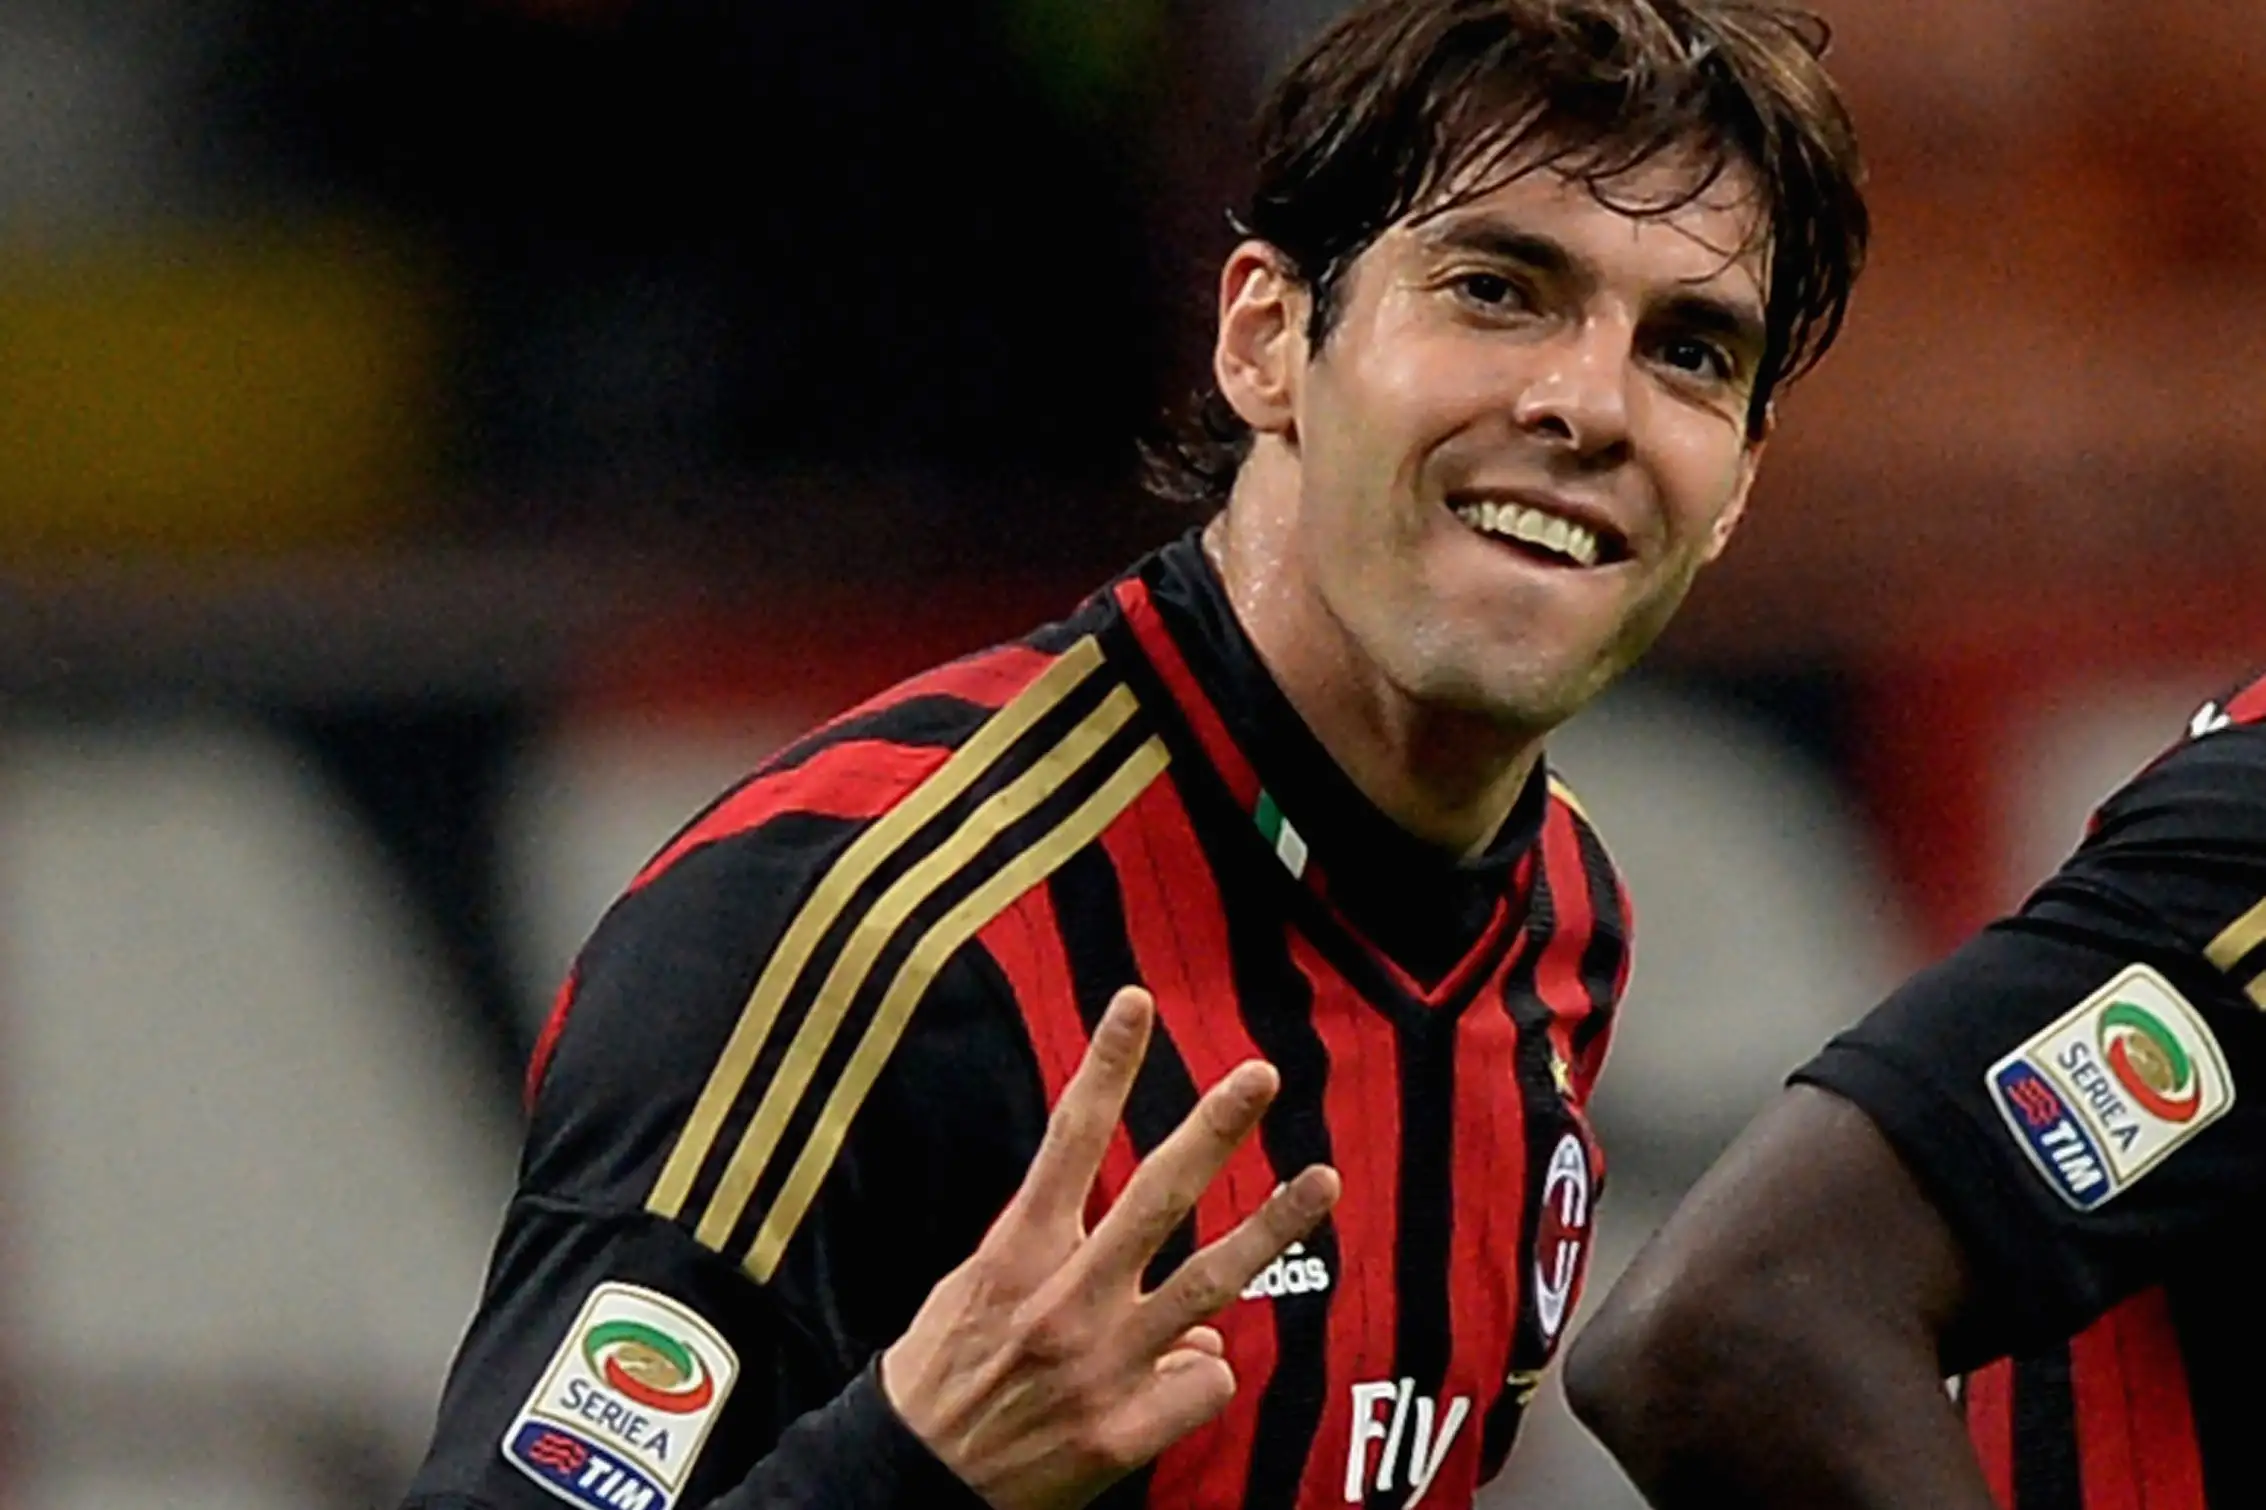 Kaka of AC Milan celebrates scoring the second goal during the Serie A match between AC Milan and AC Chievo Verona at San Siro Stadium on March 29, 2014 in Milan, Italy.